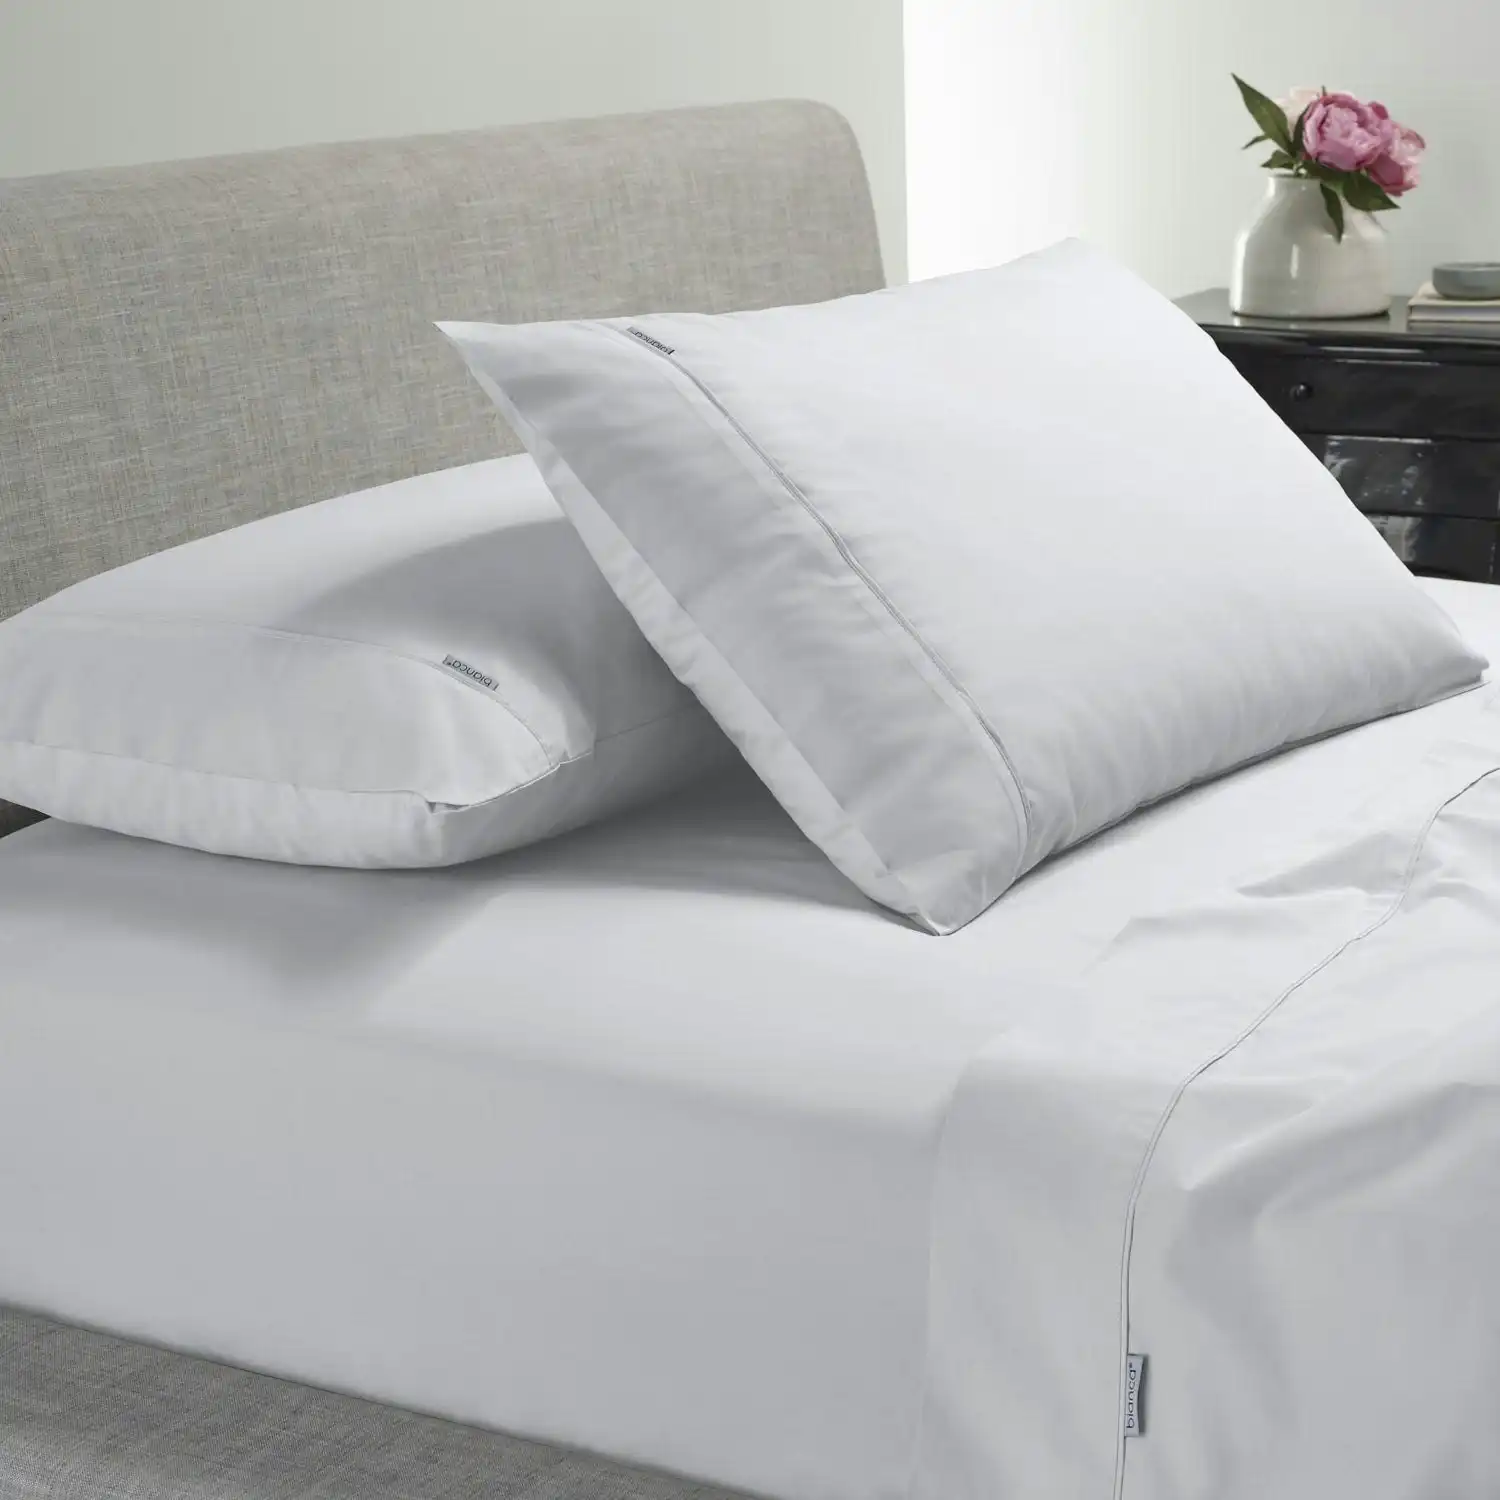 Bianca Bedding Natural Sleep Recycled Cotton and Bamboo Sheet Set - White